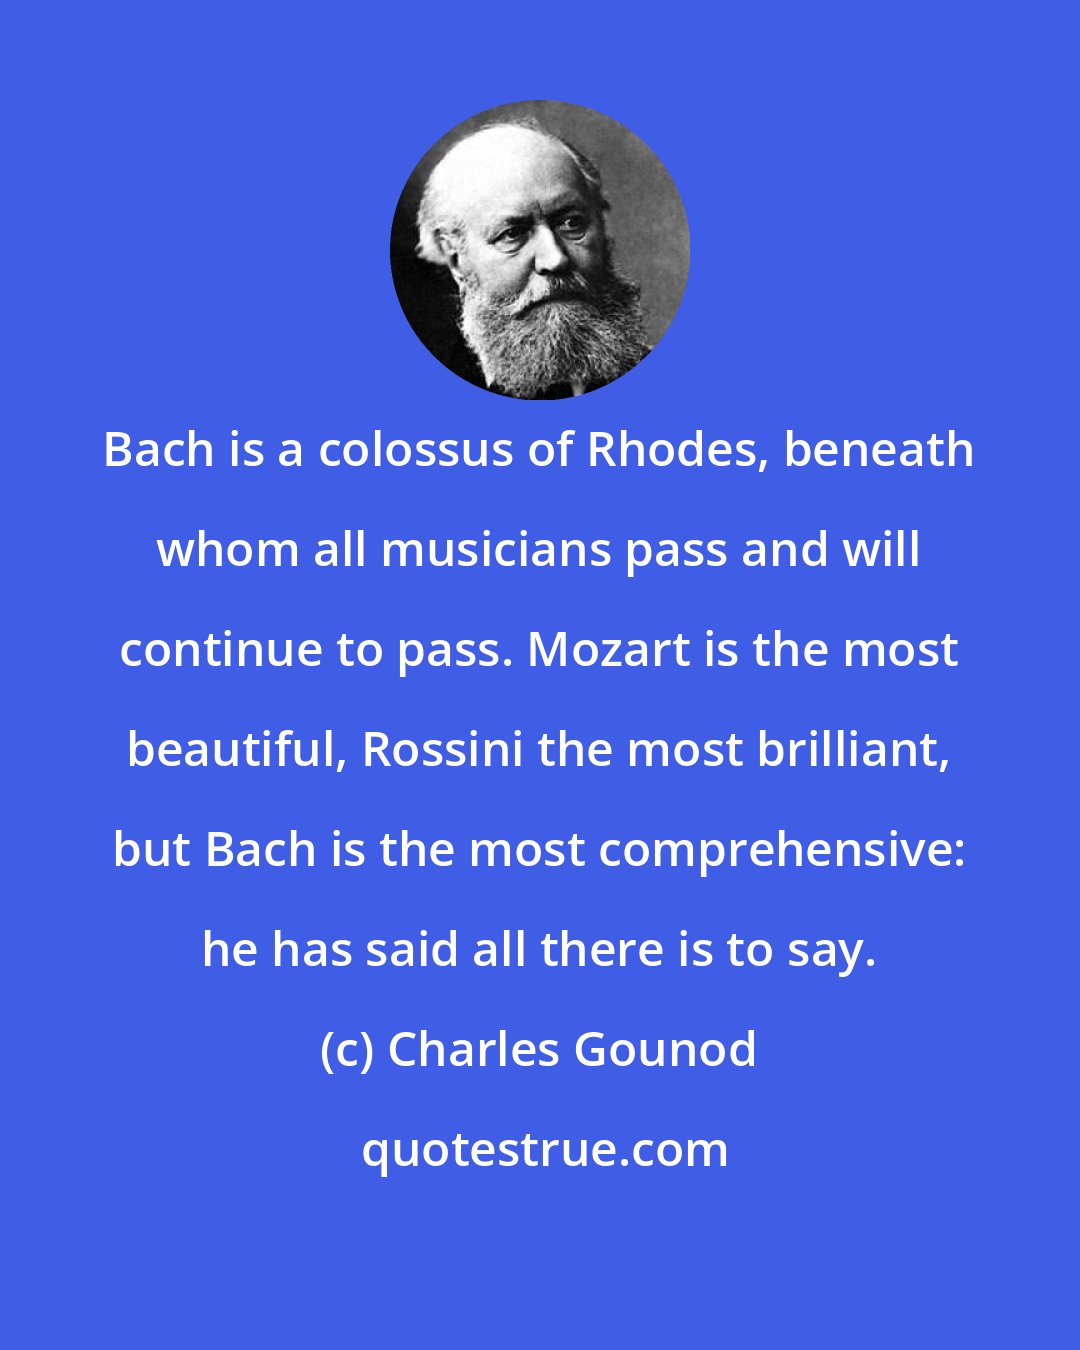 Charles Gounod: Bach is a colossus of Rhodes, beneath whom all musicians pass and will continue to pass. Mozart is the most beautiful, Rossini the most brilliant, but Bach is the most comprehensive: he has said all there is to say.